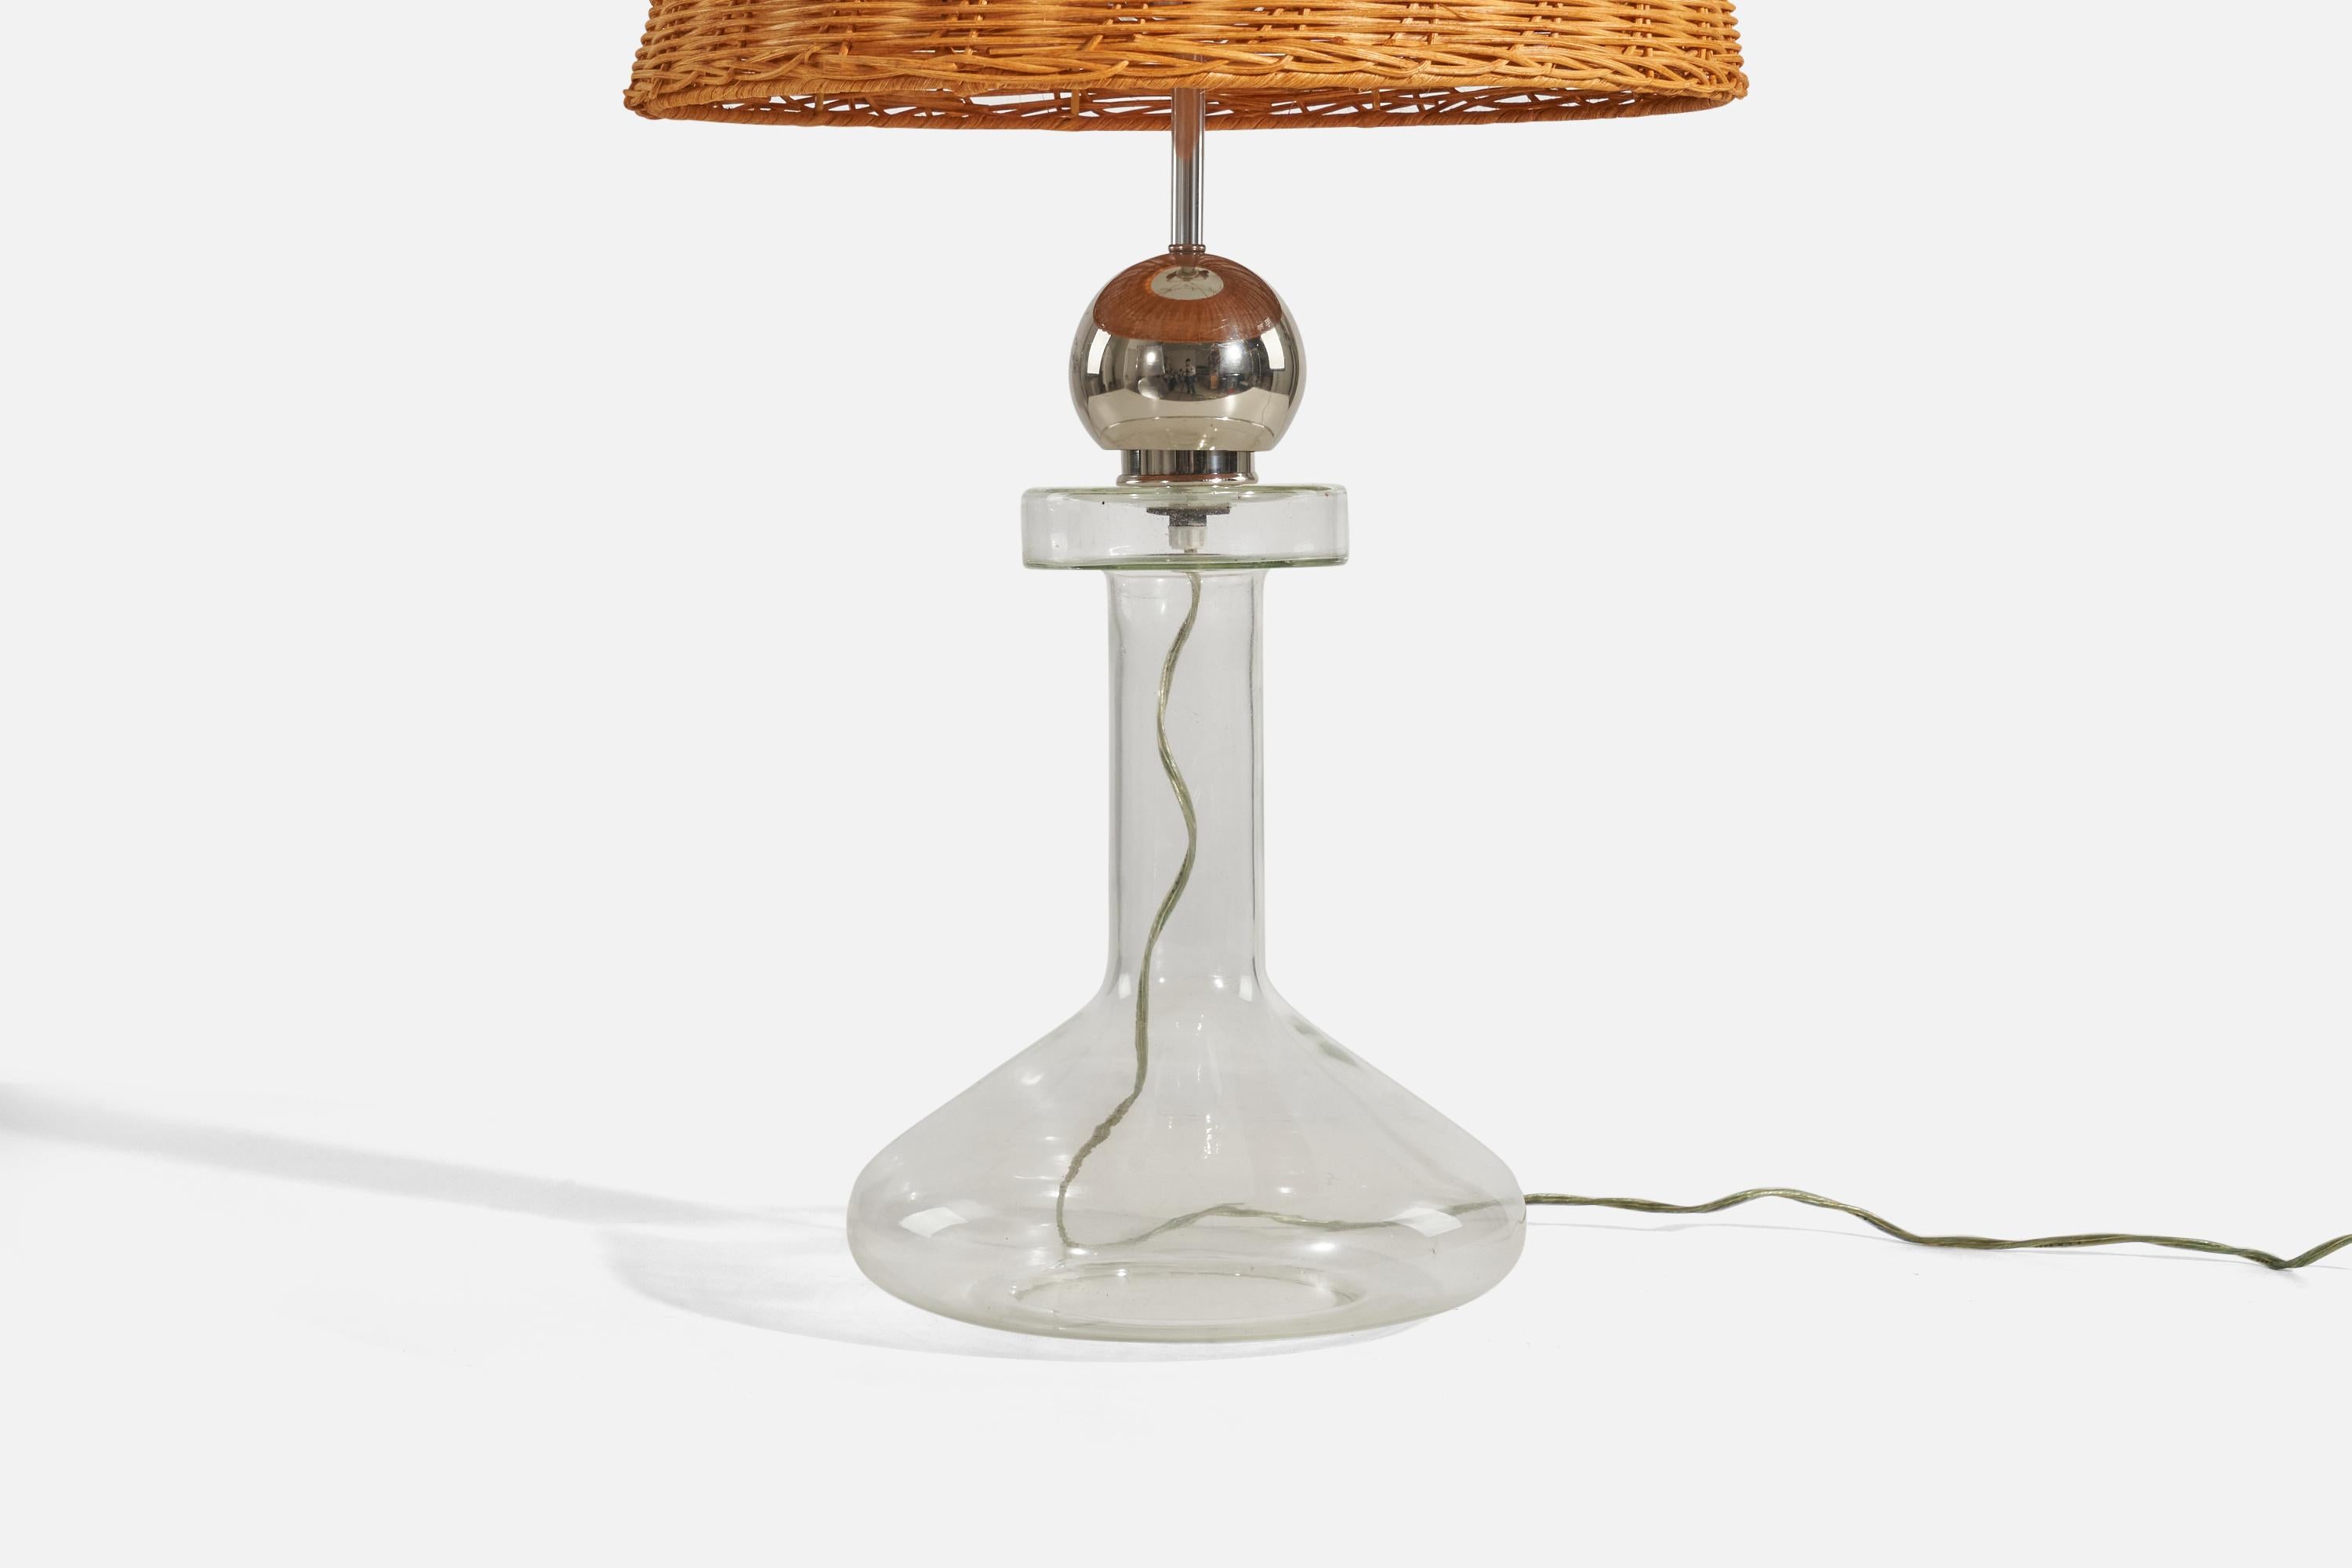 A pair of chrome metal, glass and rattan table lamps designed and produced by Laurel Lamp Co., United States, 1970s.
 
Sold with lampshade(s)
Dimensions of lamp (inches) : 21.12 x 10.25 x 10.25 (height x width x depth)
Dimensions of shade